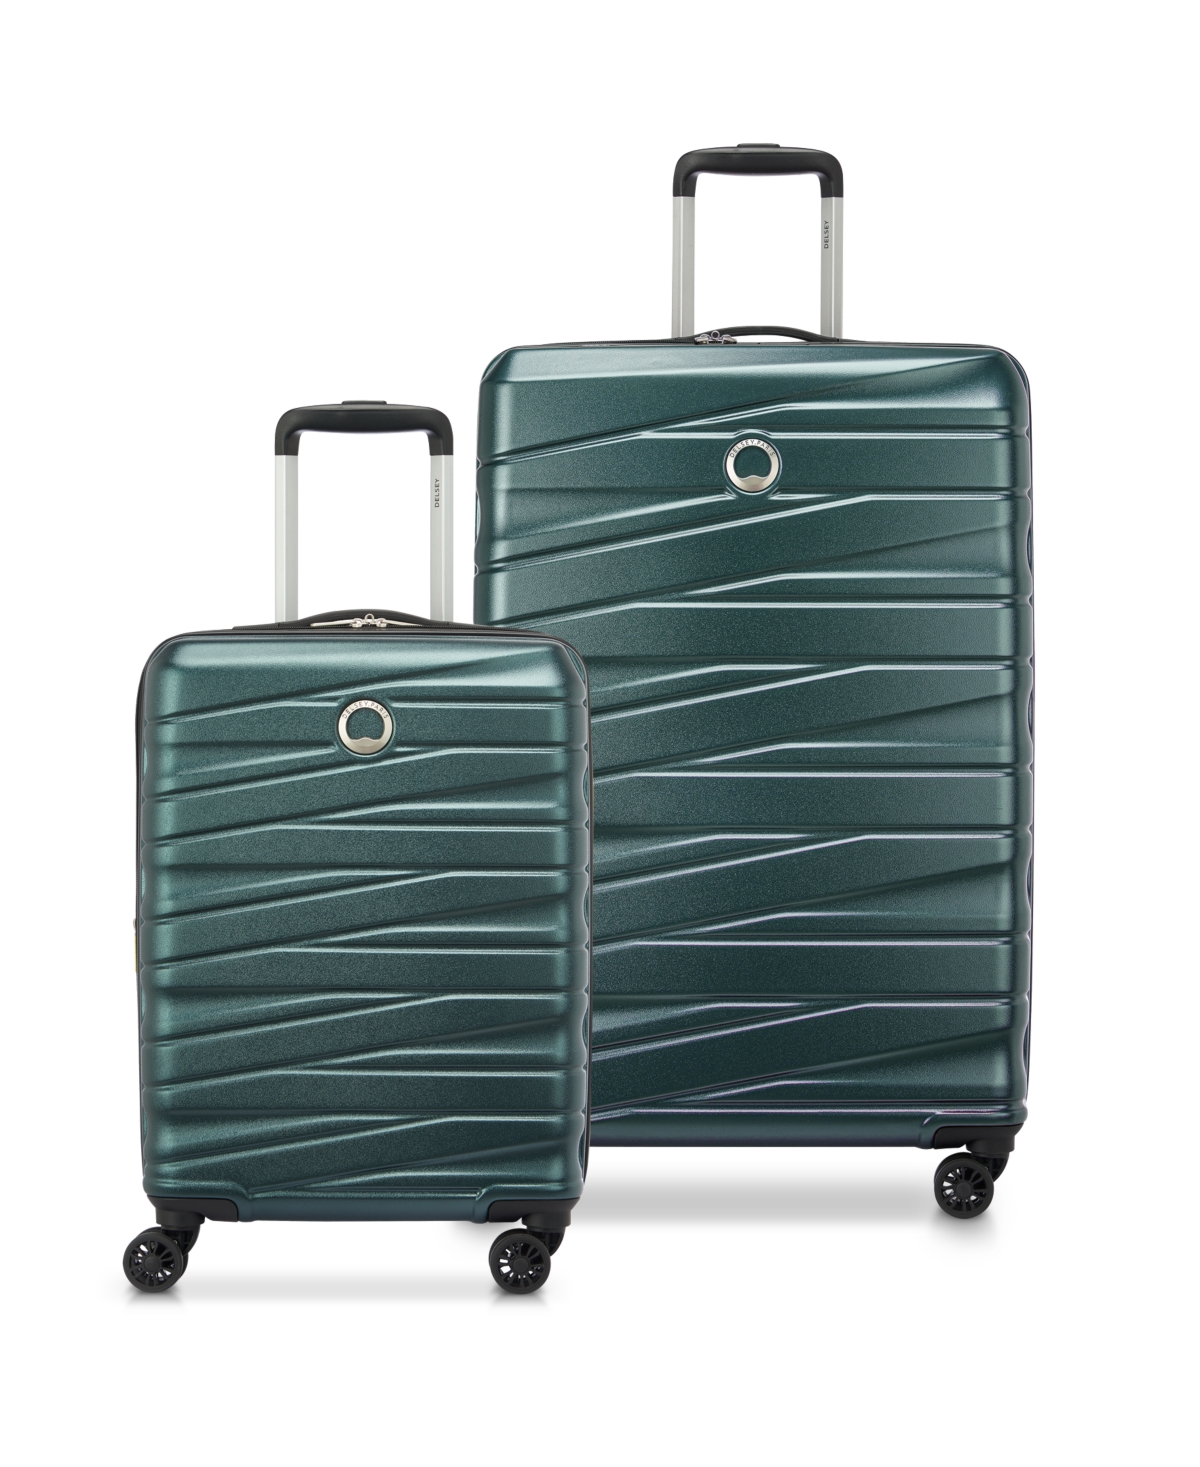 Delsey Cannes 2 Piece Hardside Luggage Set, Carry-on And 27" Spinner In Dark Teal